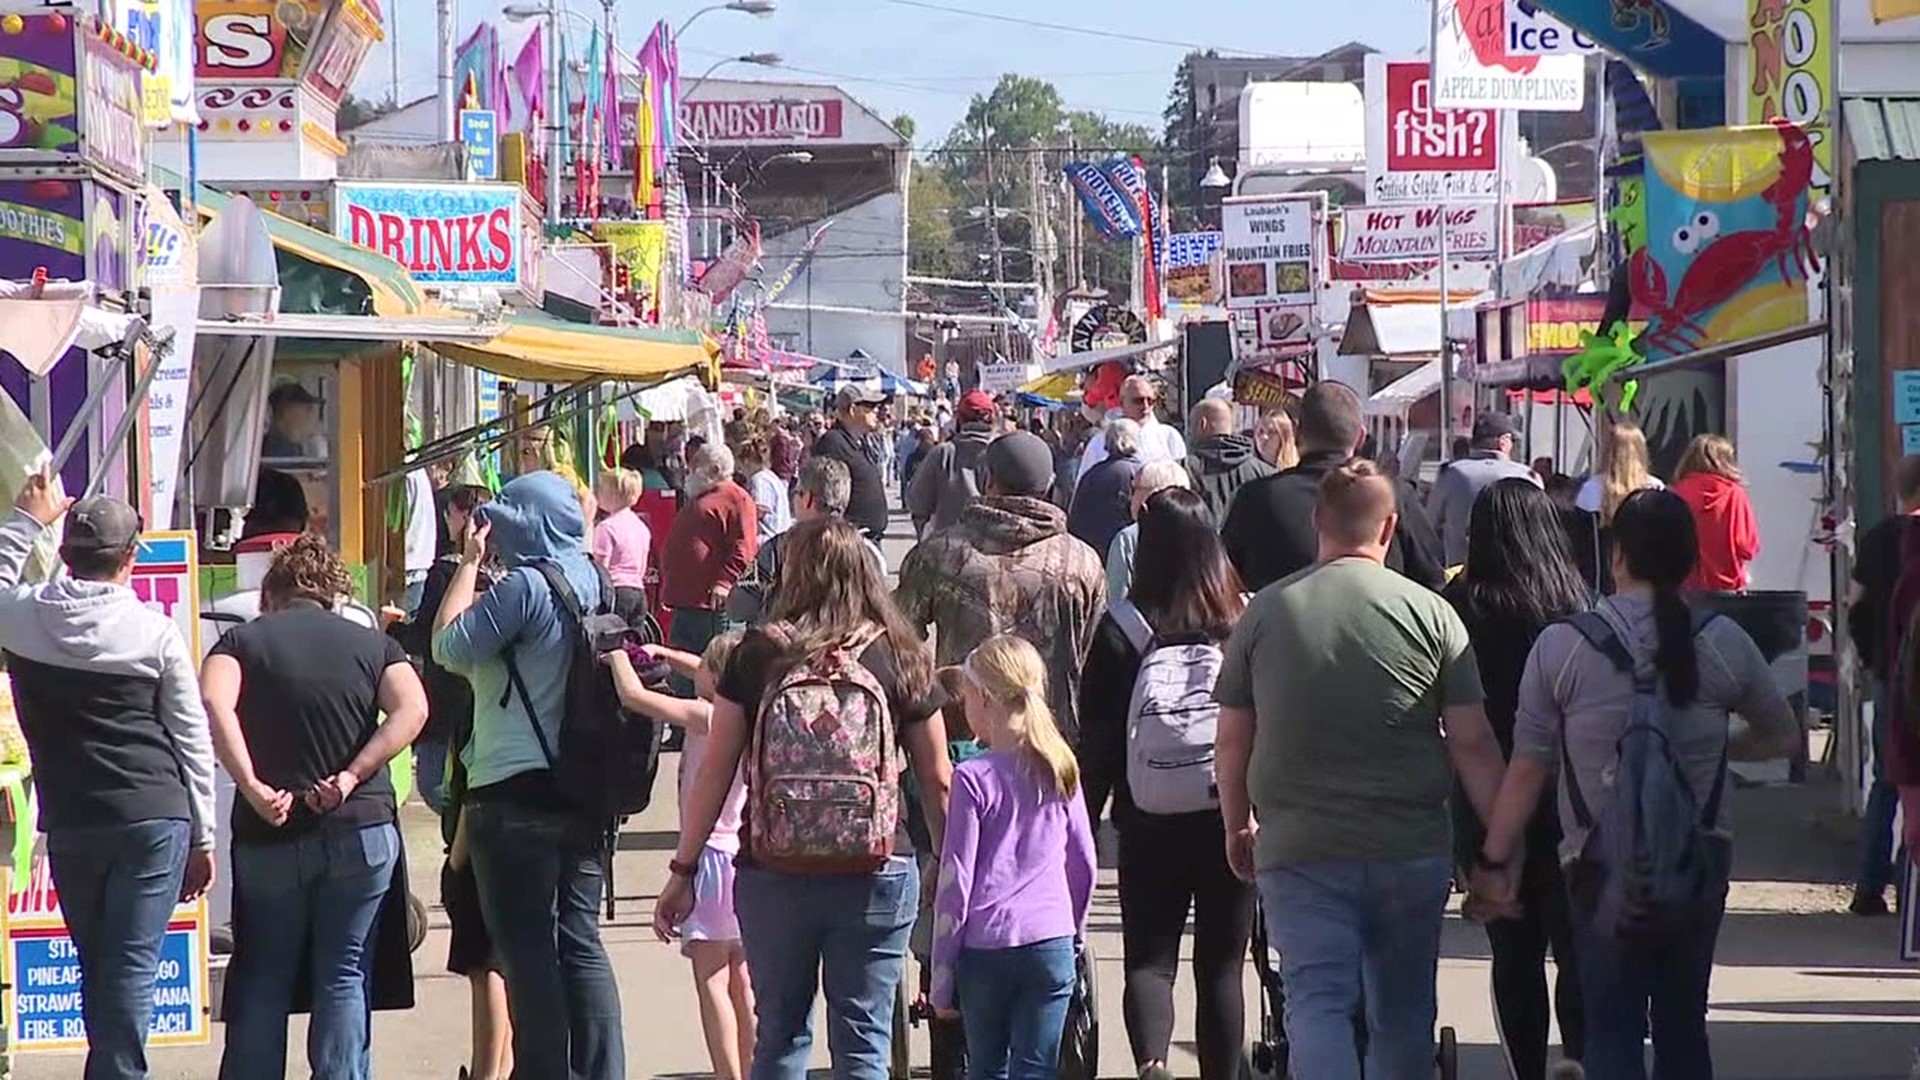 The 166th Bloomsburg Fair is winding down. There is only one more day to enjoy the fair, and luckily, the weather has been beautiful almost all week.